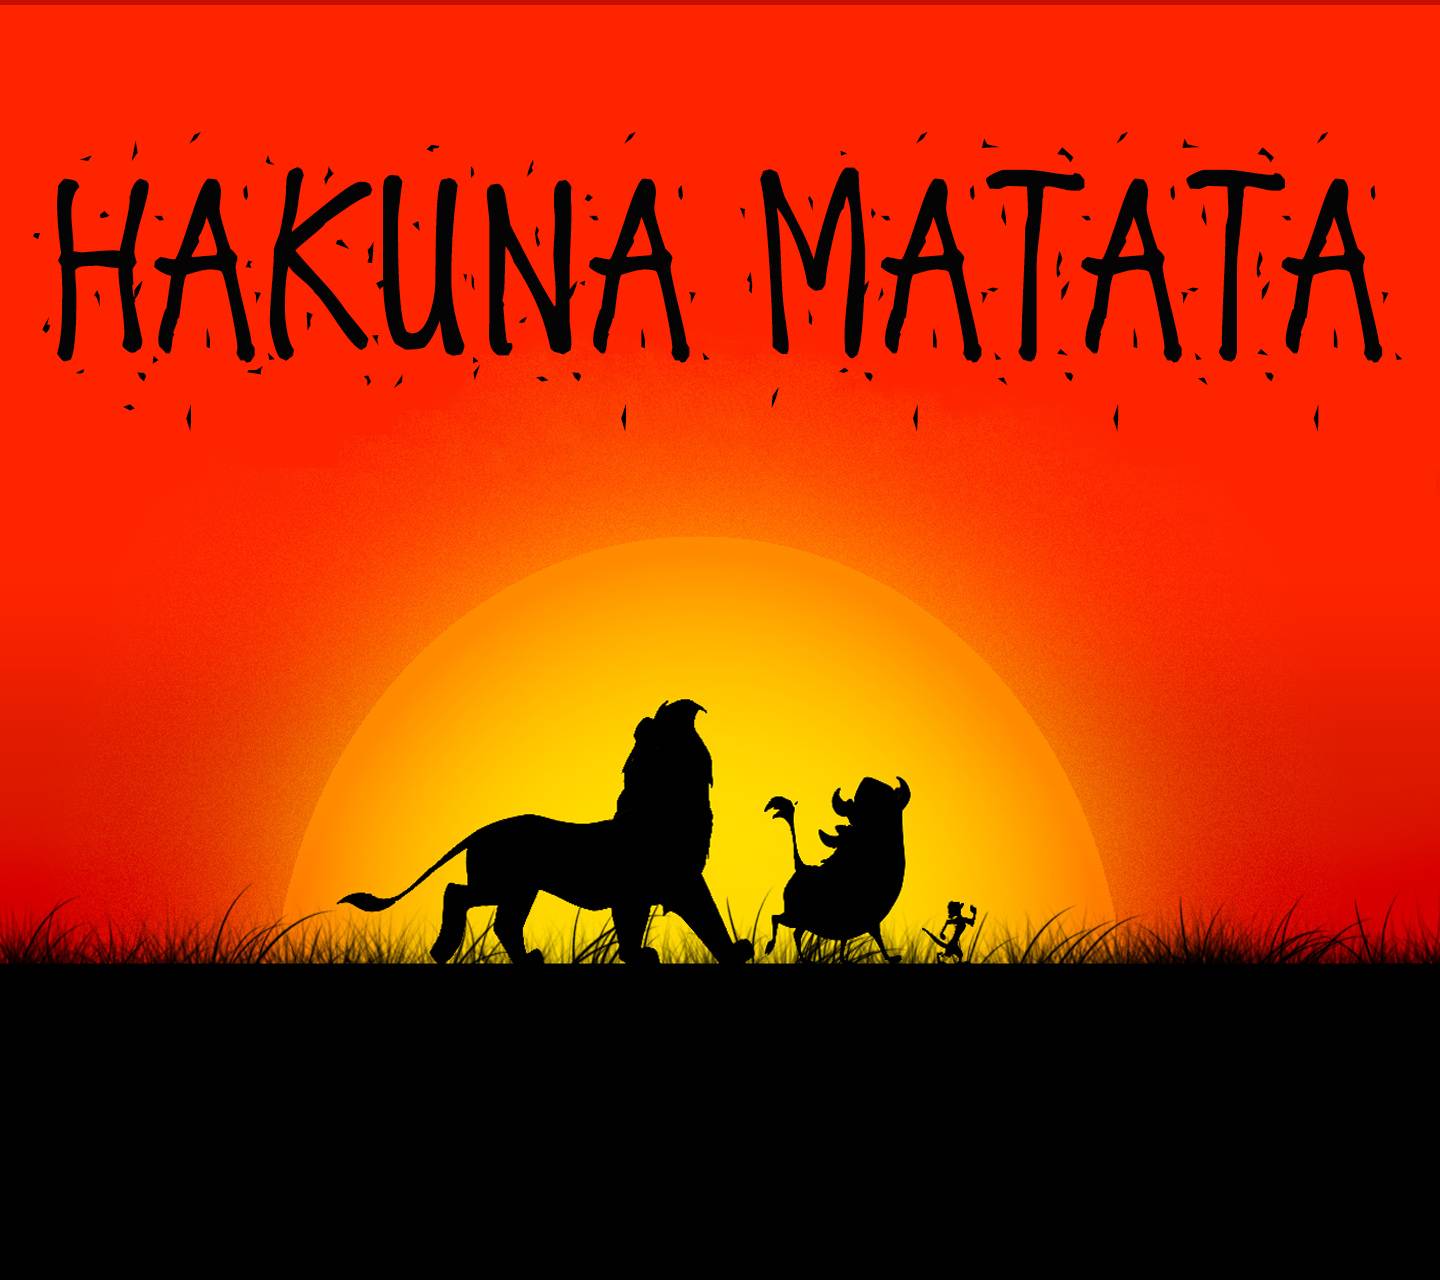 Download free timon and pumbaa wallpaper for your mobile phone